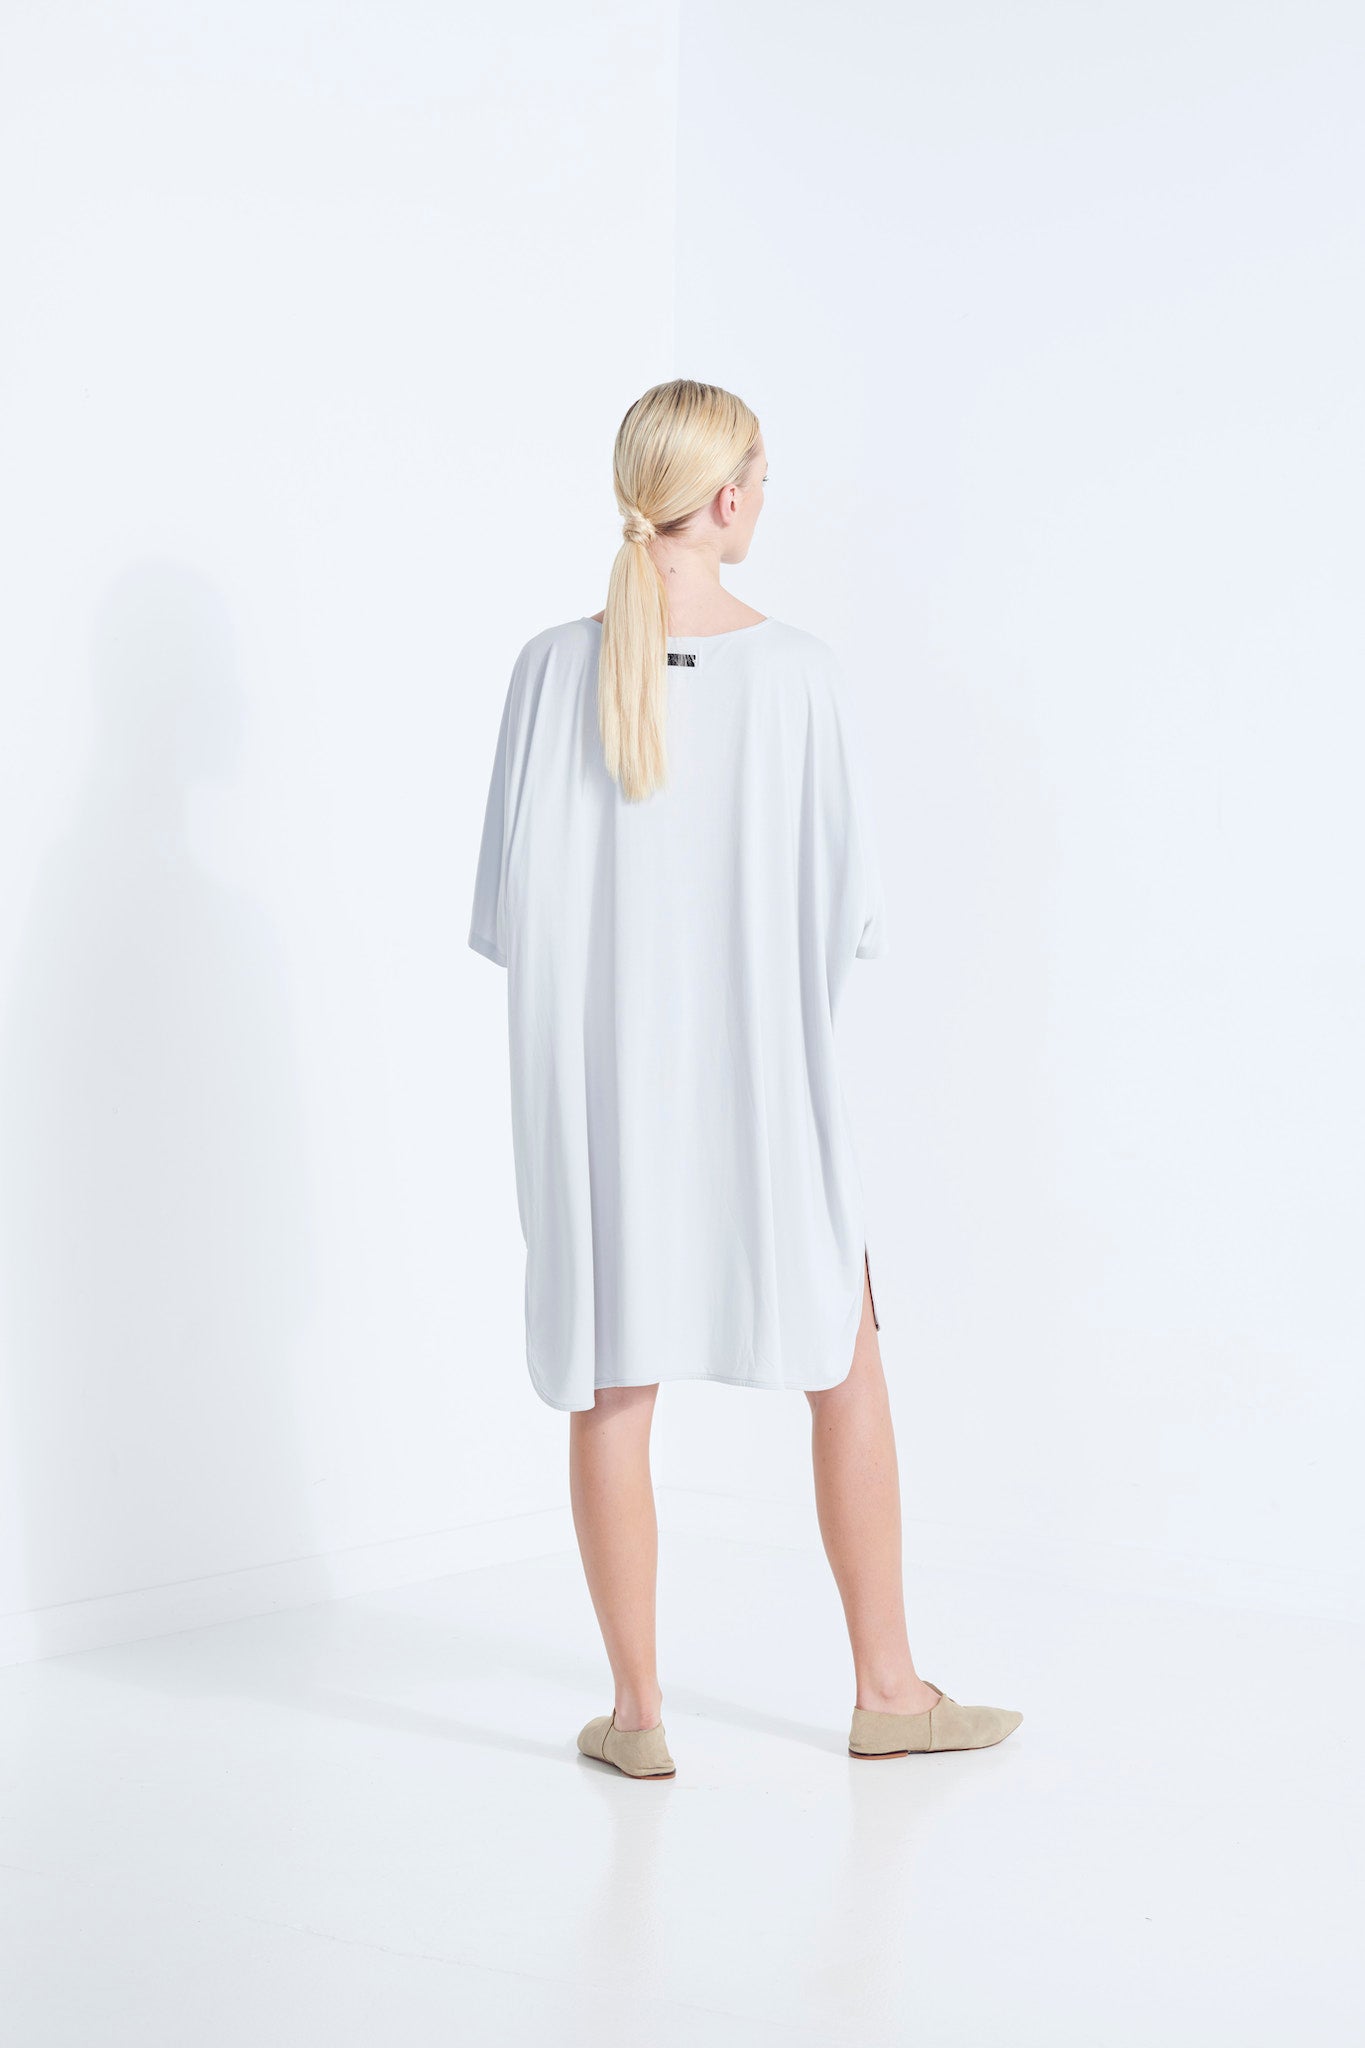 THEMIS DRESS LONGLINE T-SHIRT BEECHWOOD MODAL STRETCH WITH REMOVABLE TIE WISP PALE WASHED GREY  BACK VIEW